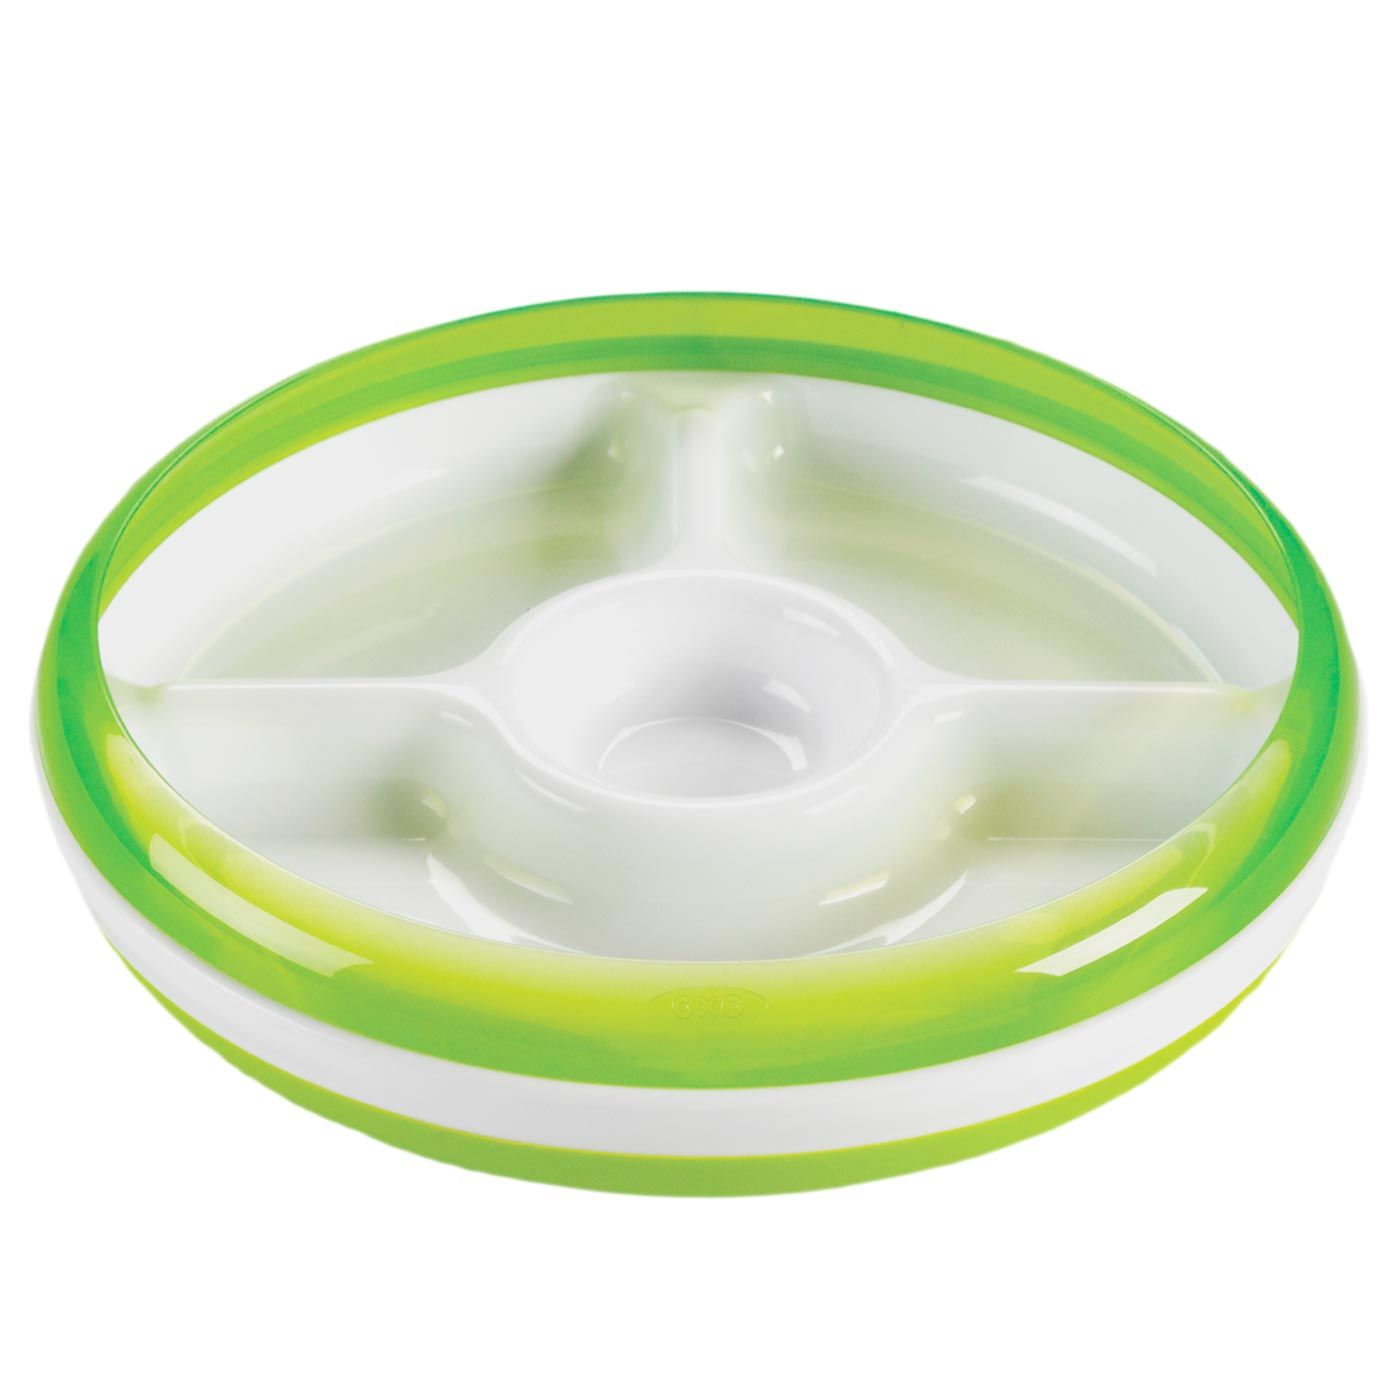 OXO Tot Divided Plate-Green - 1